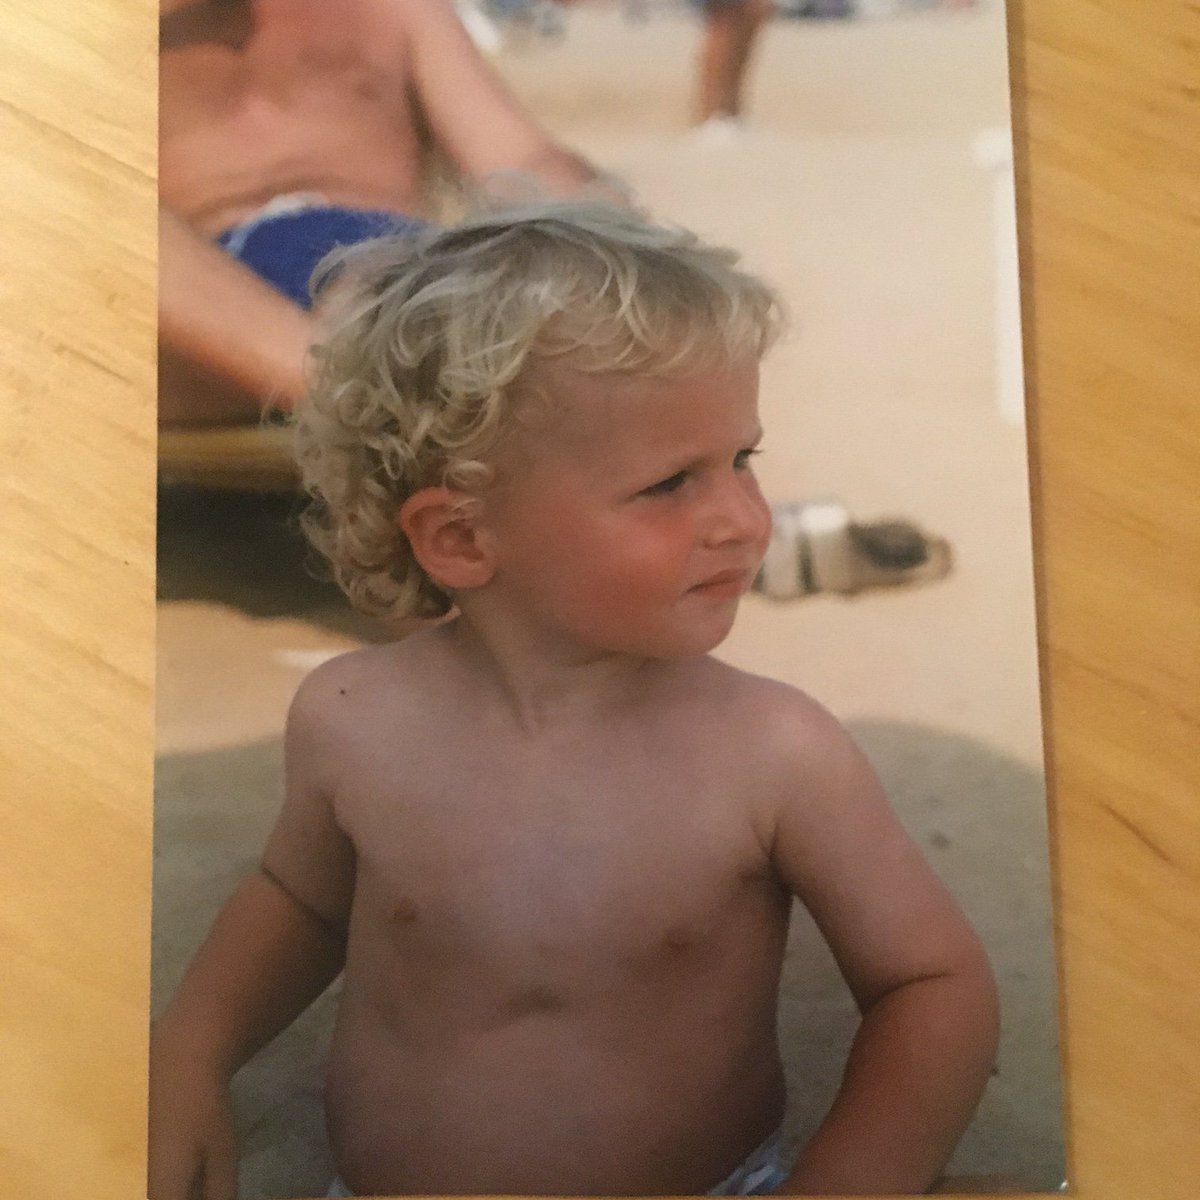 In December 1997 my youngest son then aged three contracted pneumococcal meningitis and was in intensive care for 10 days. He spent another 5 days in hospital before he could even walk two or three steps again. He was 'lucky' he survived but as a result is profoundly deaf. 1/